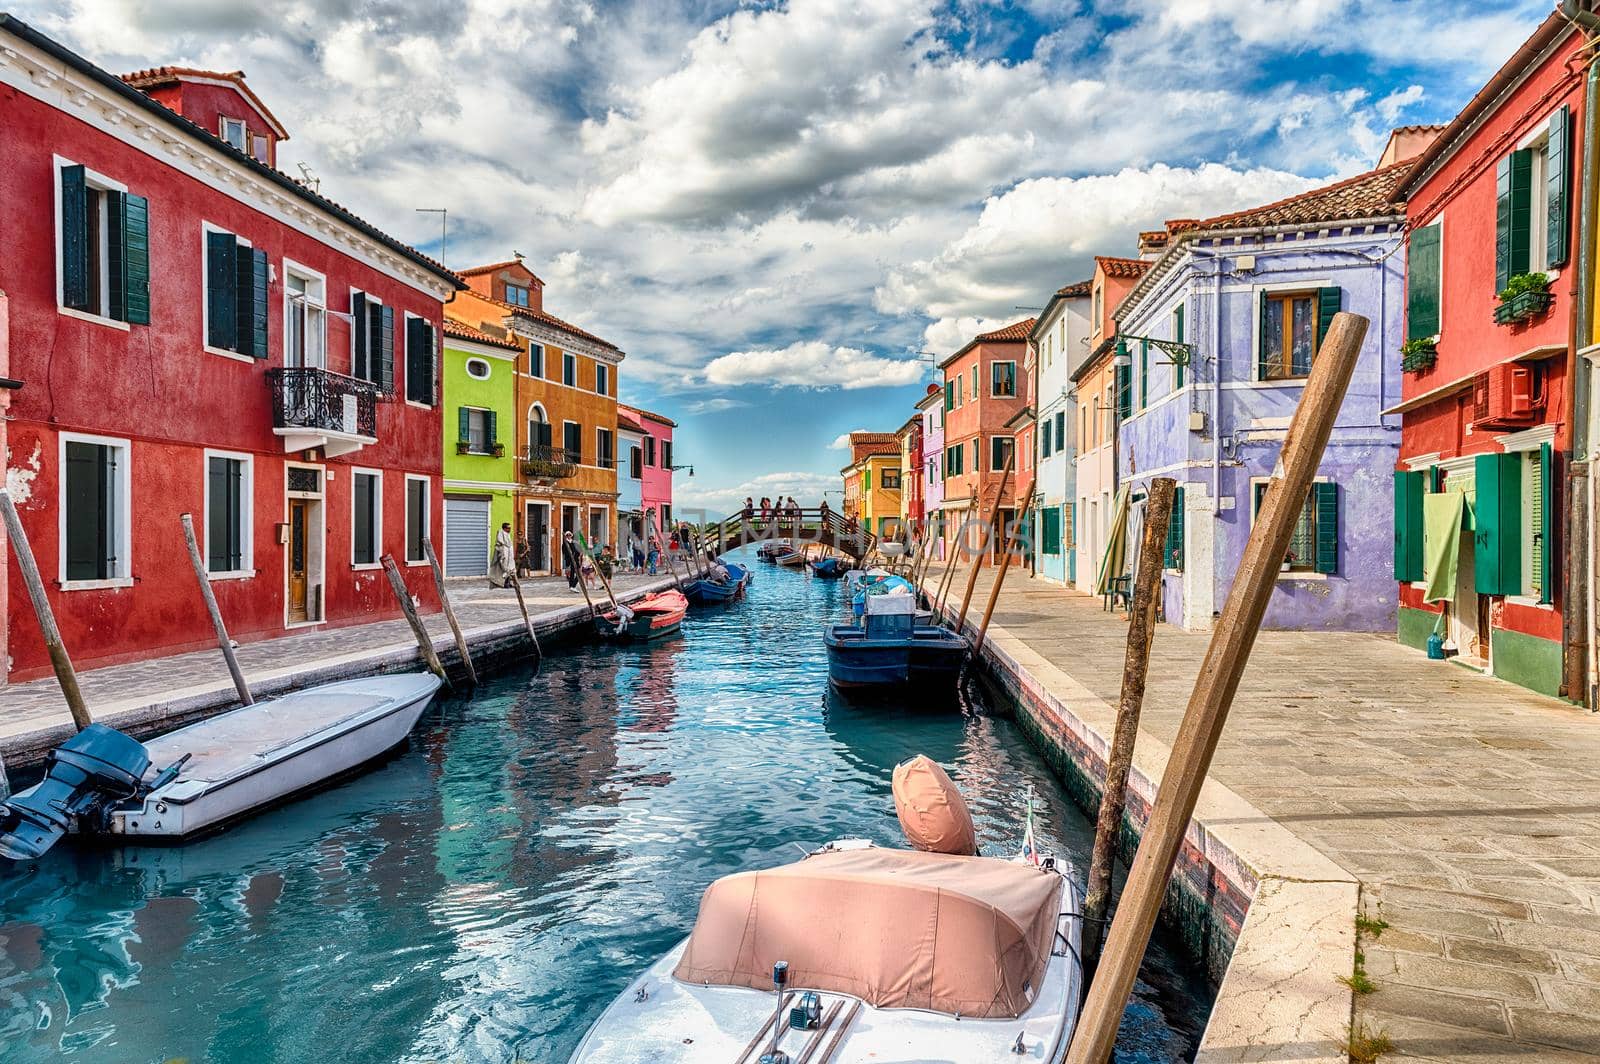 Colorful houses along the canal, island of Burano, Venice, Italy by marcorubino